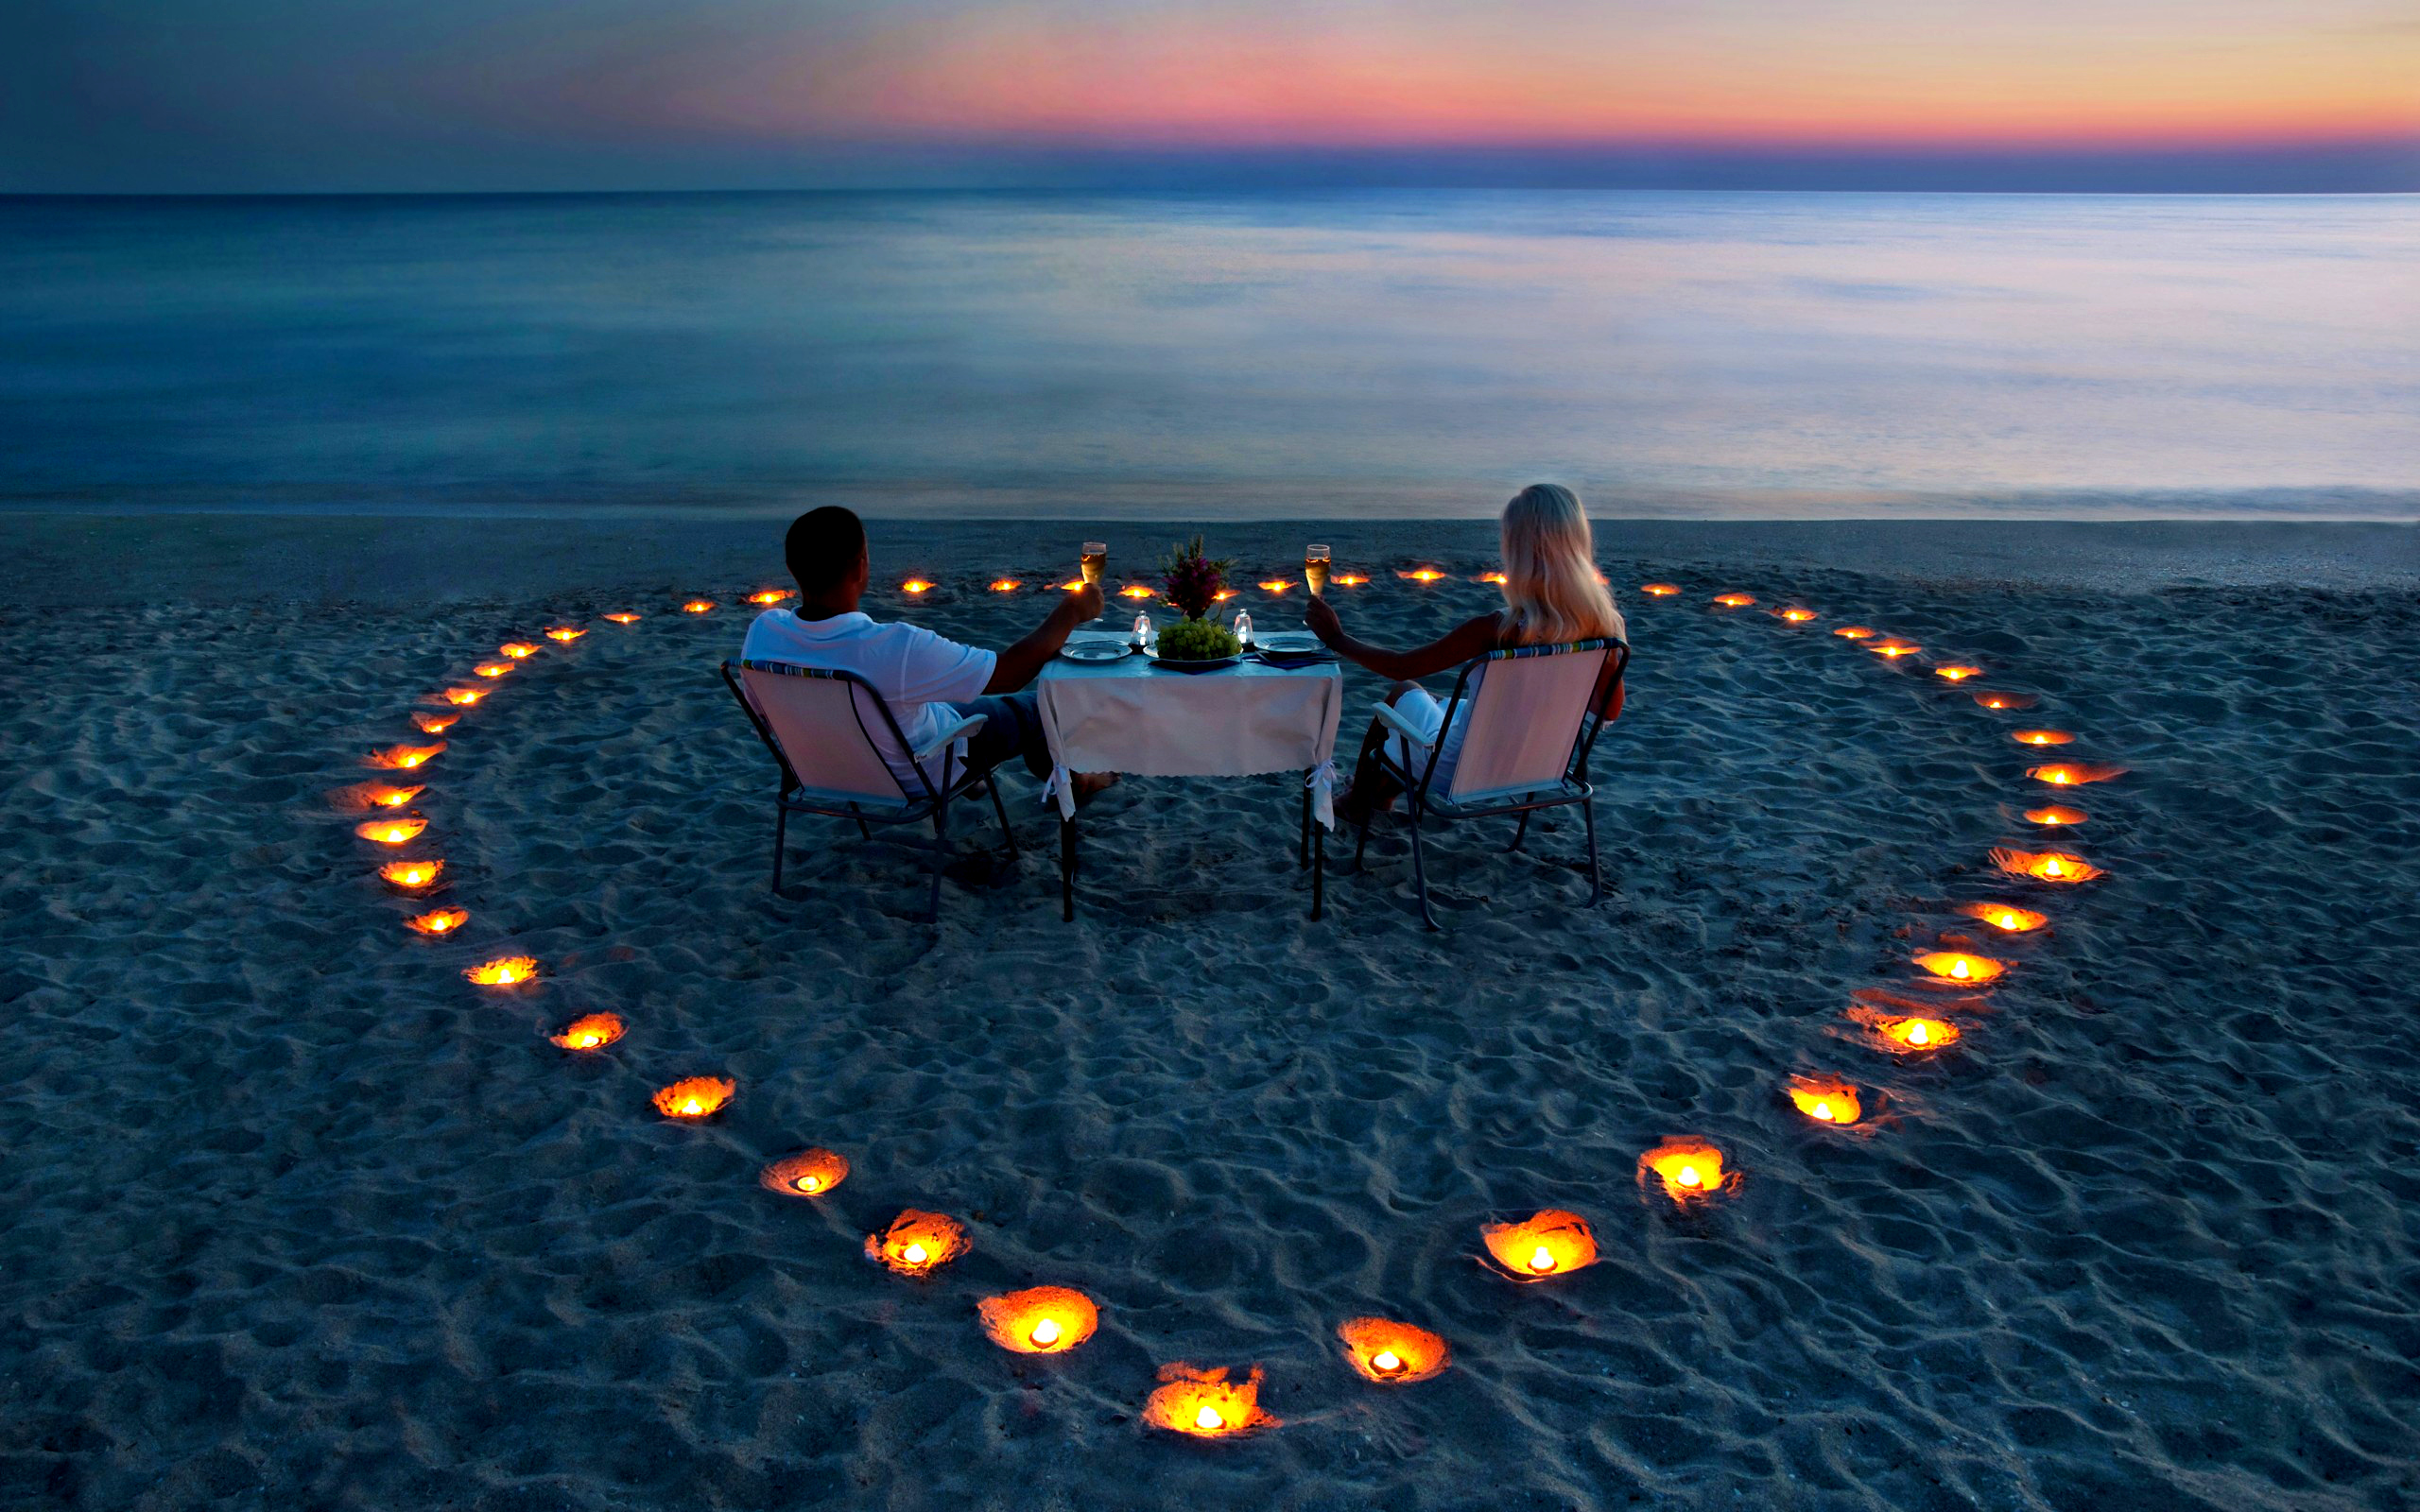 50 Best Romantic Pictures To Show Your Love – The WoW Style